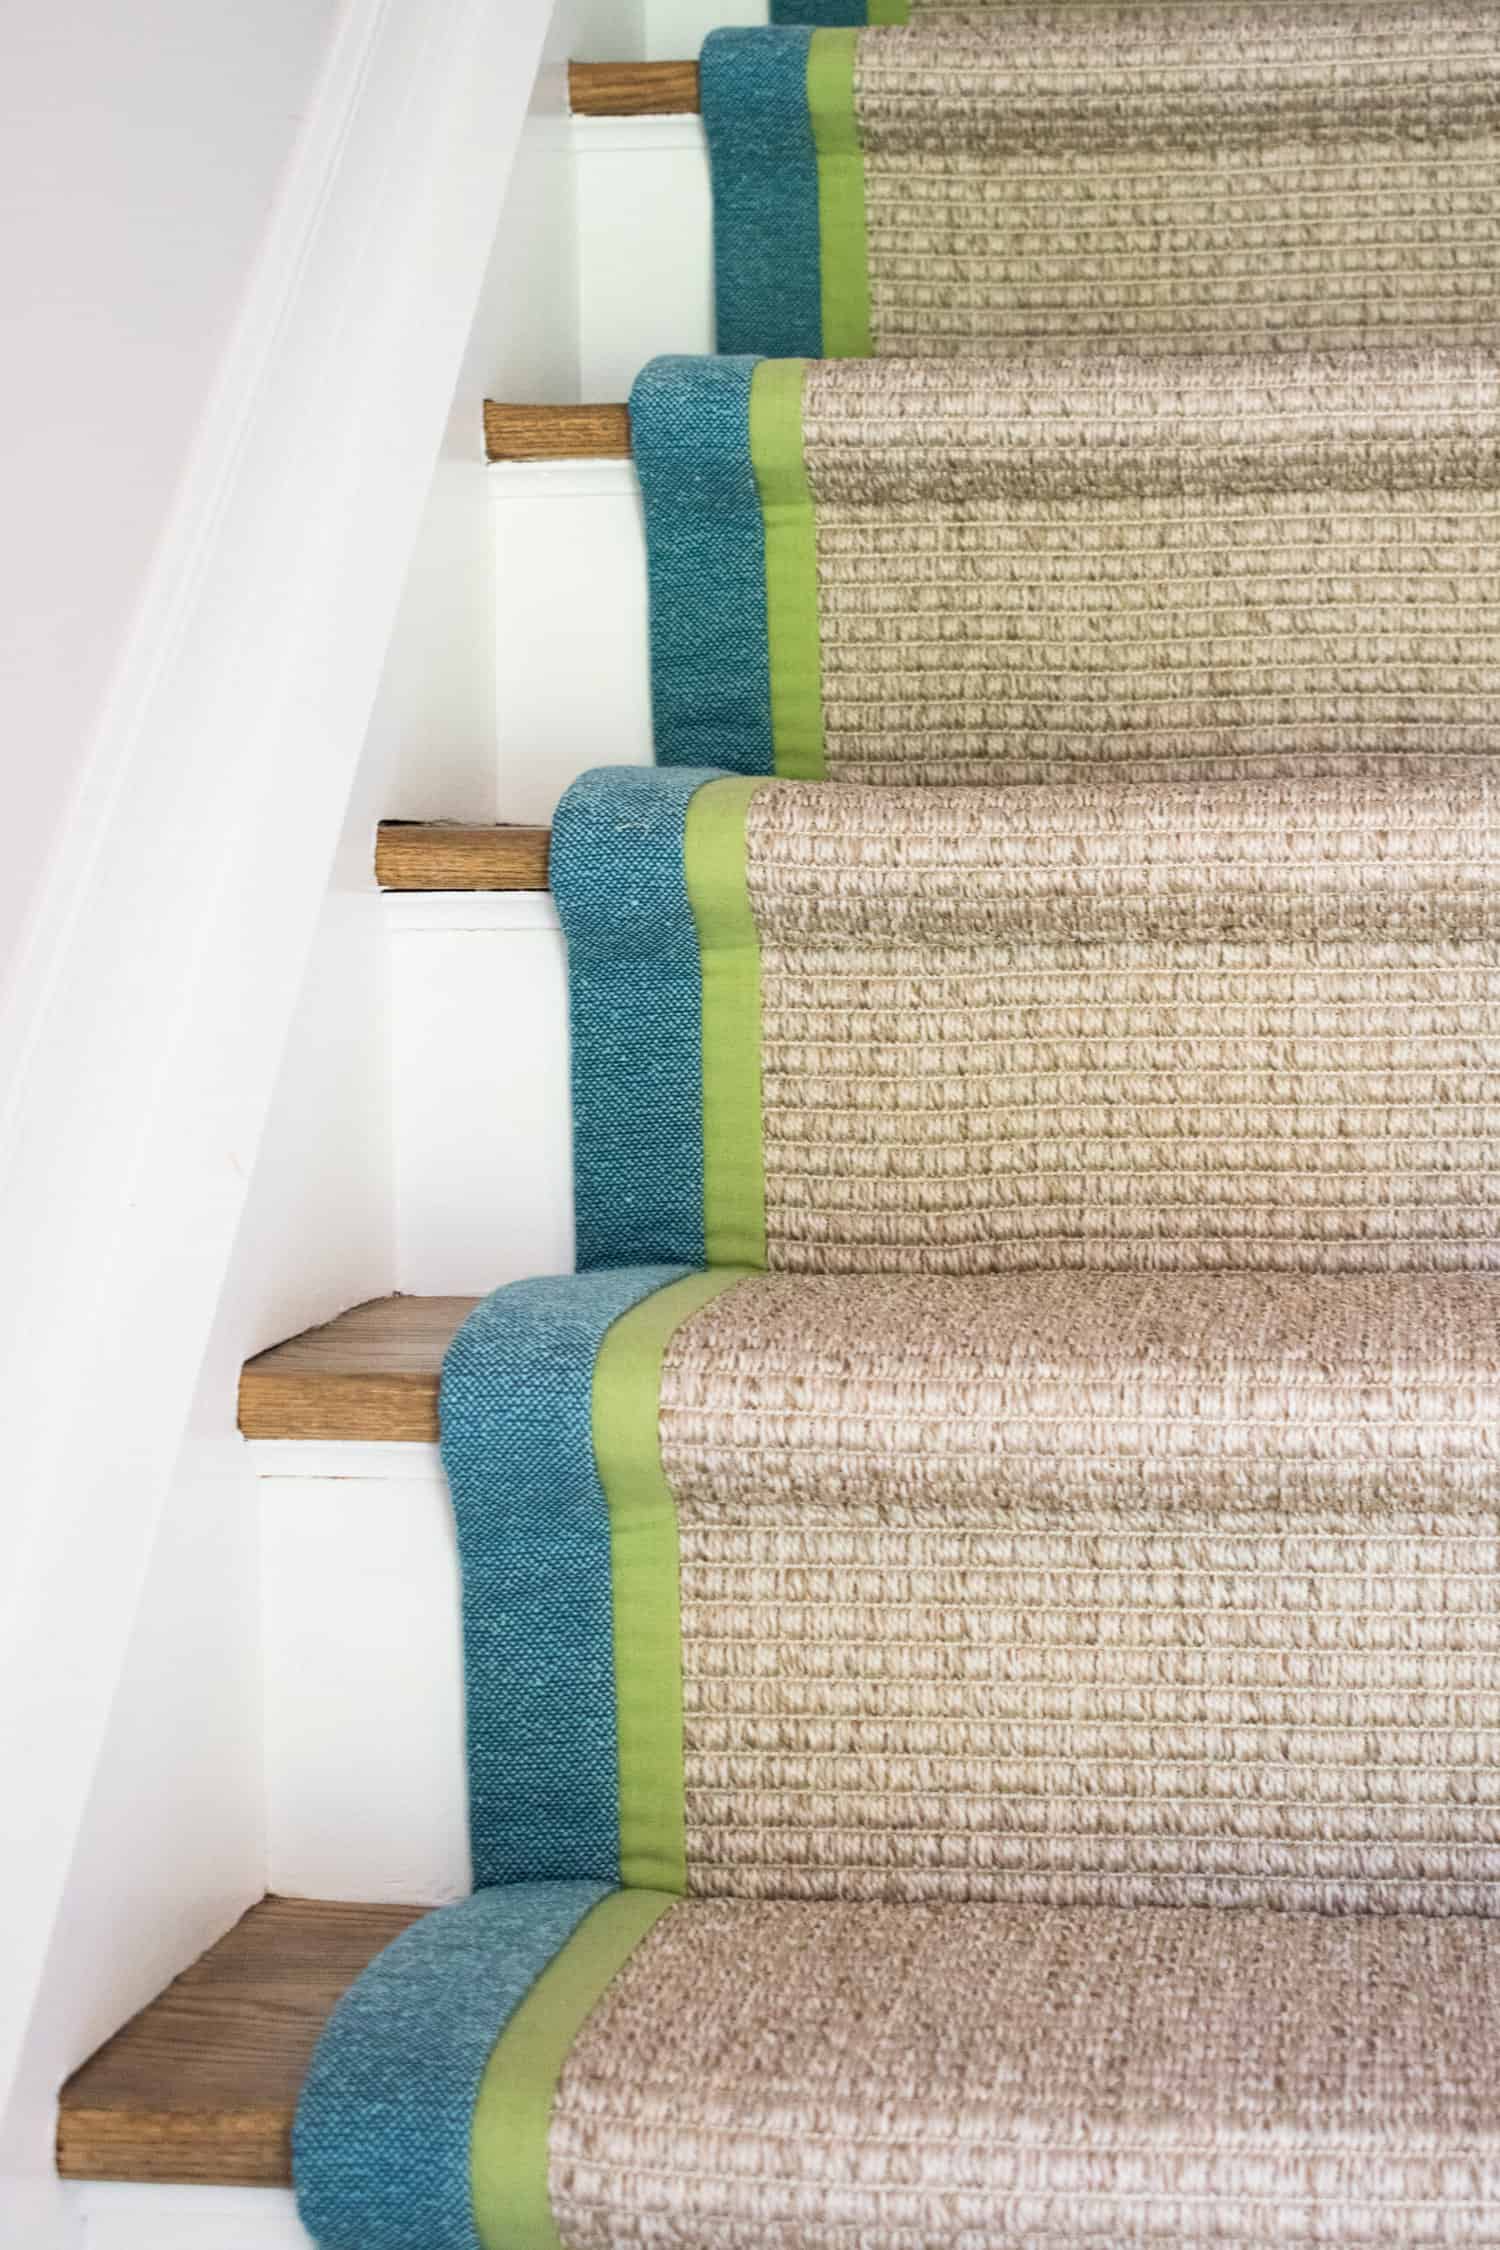 Turn Your Carpet Into a Rug: Carpet Binding & Accessorizing